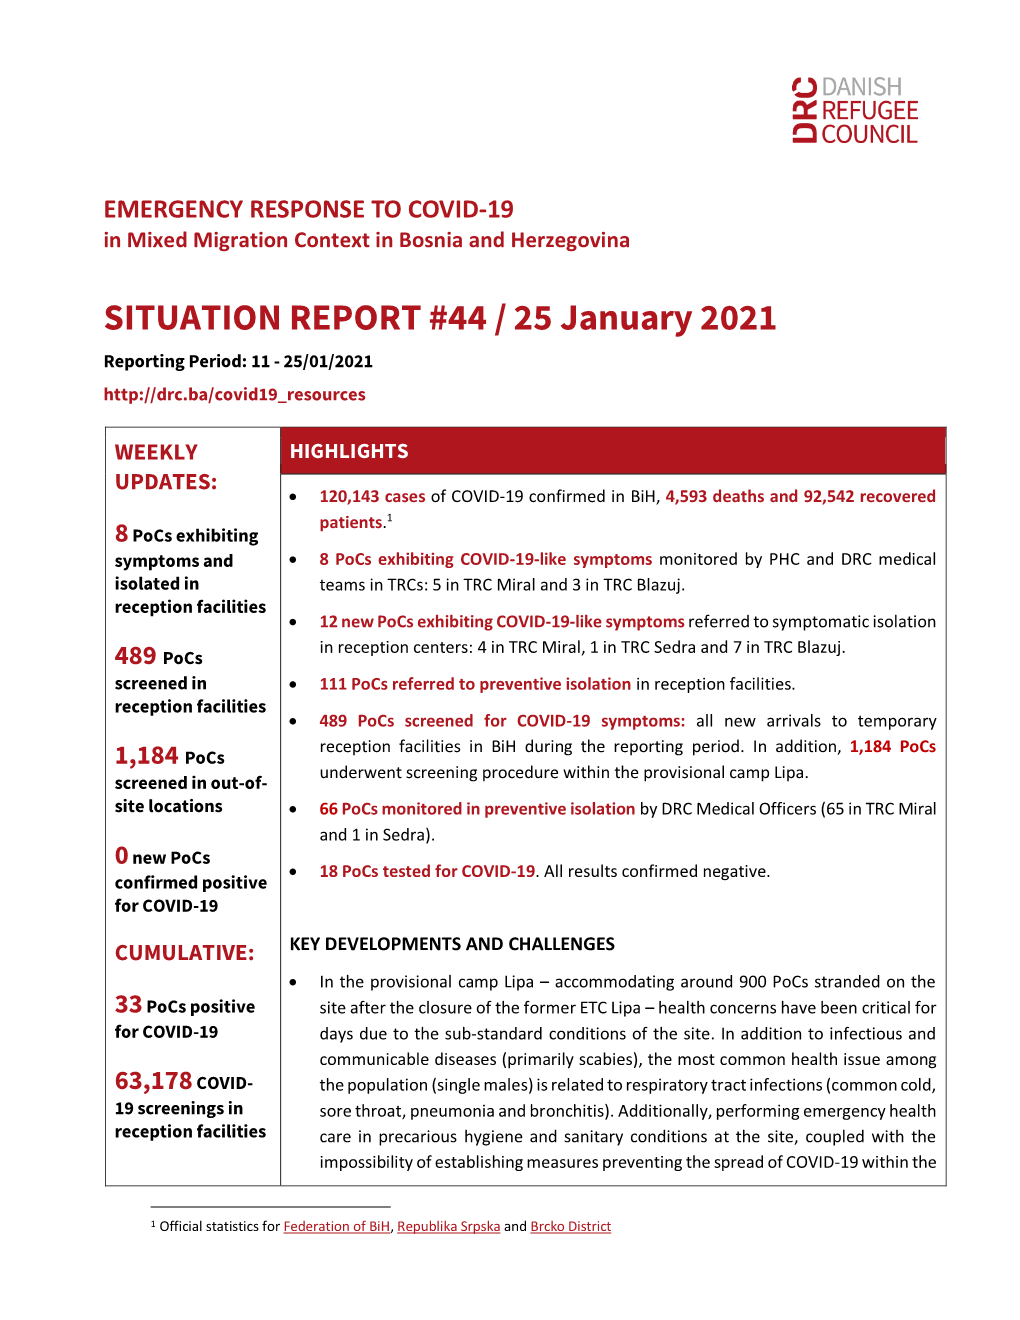 SITUATION REPORT #44 / 25 January 2021 Reporting Period: 11 - 25/01/2021